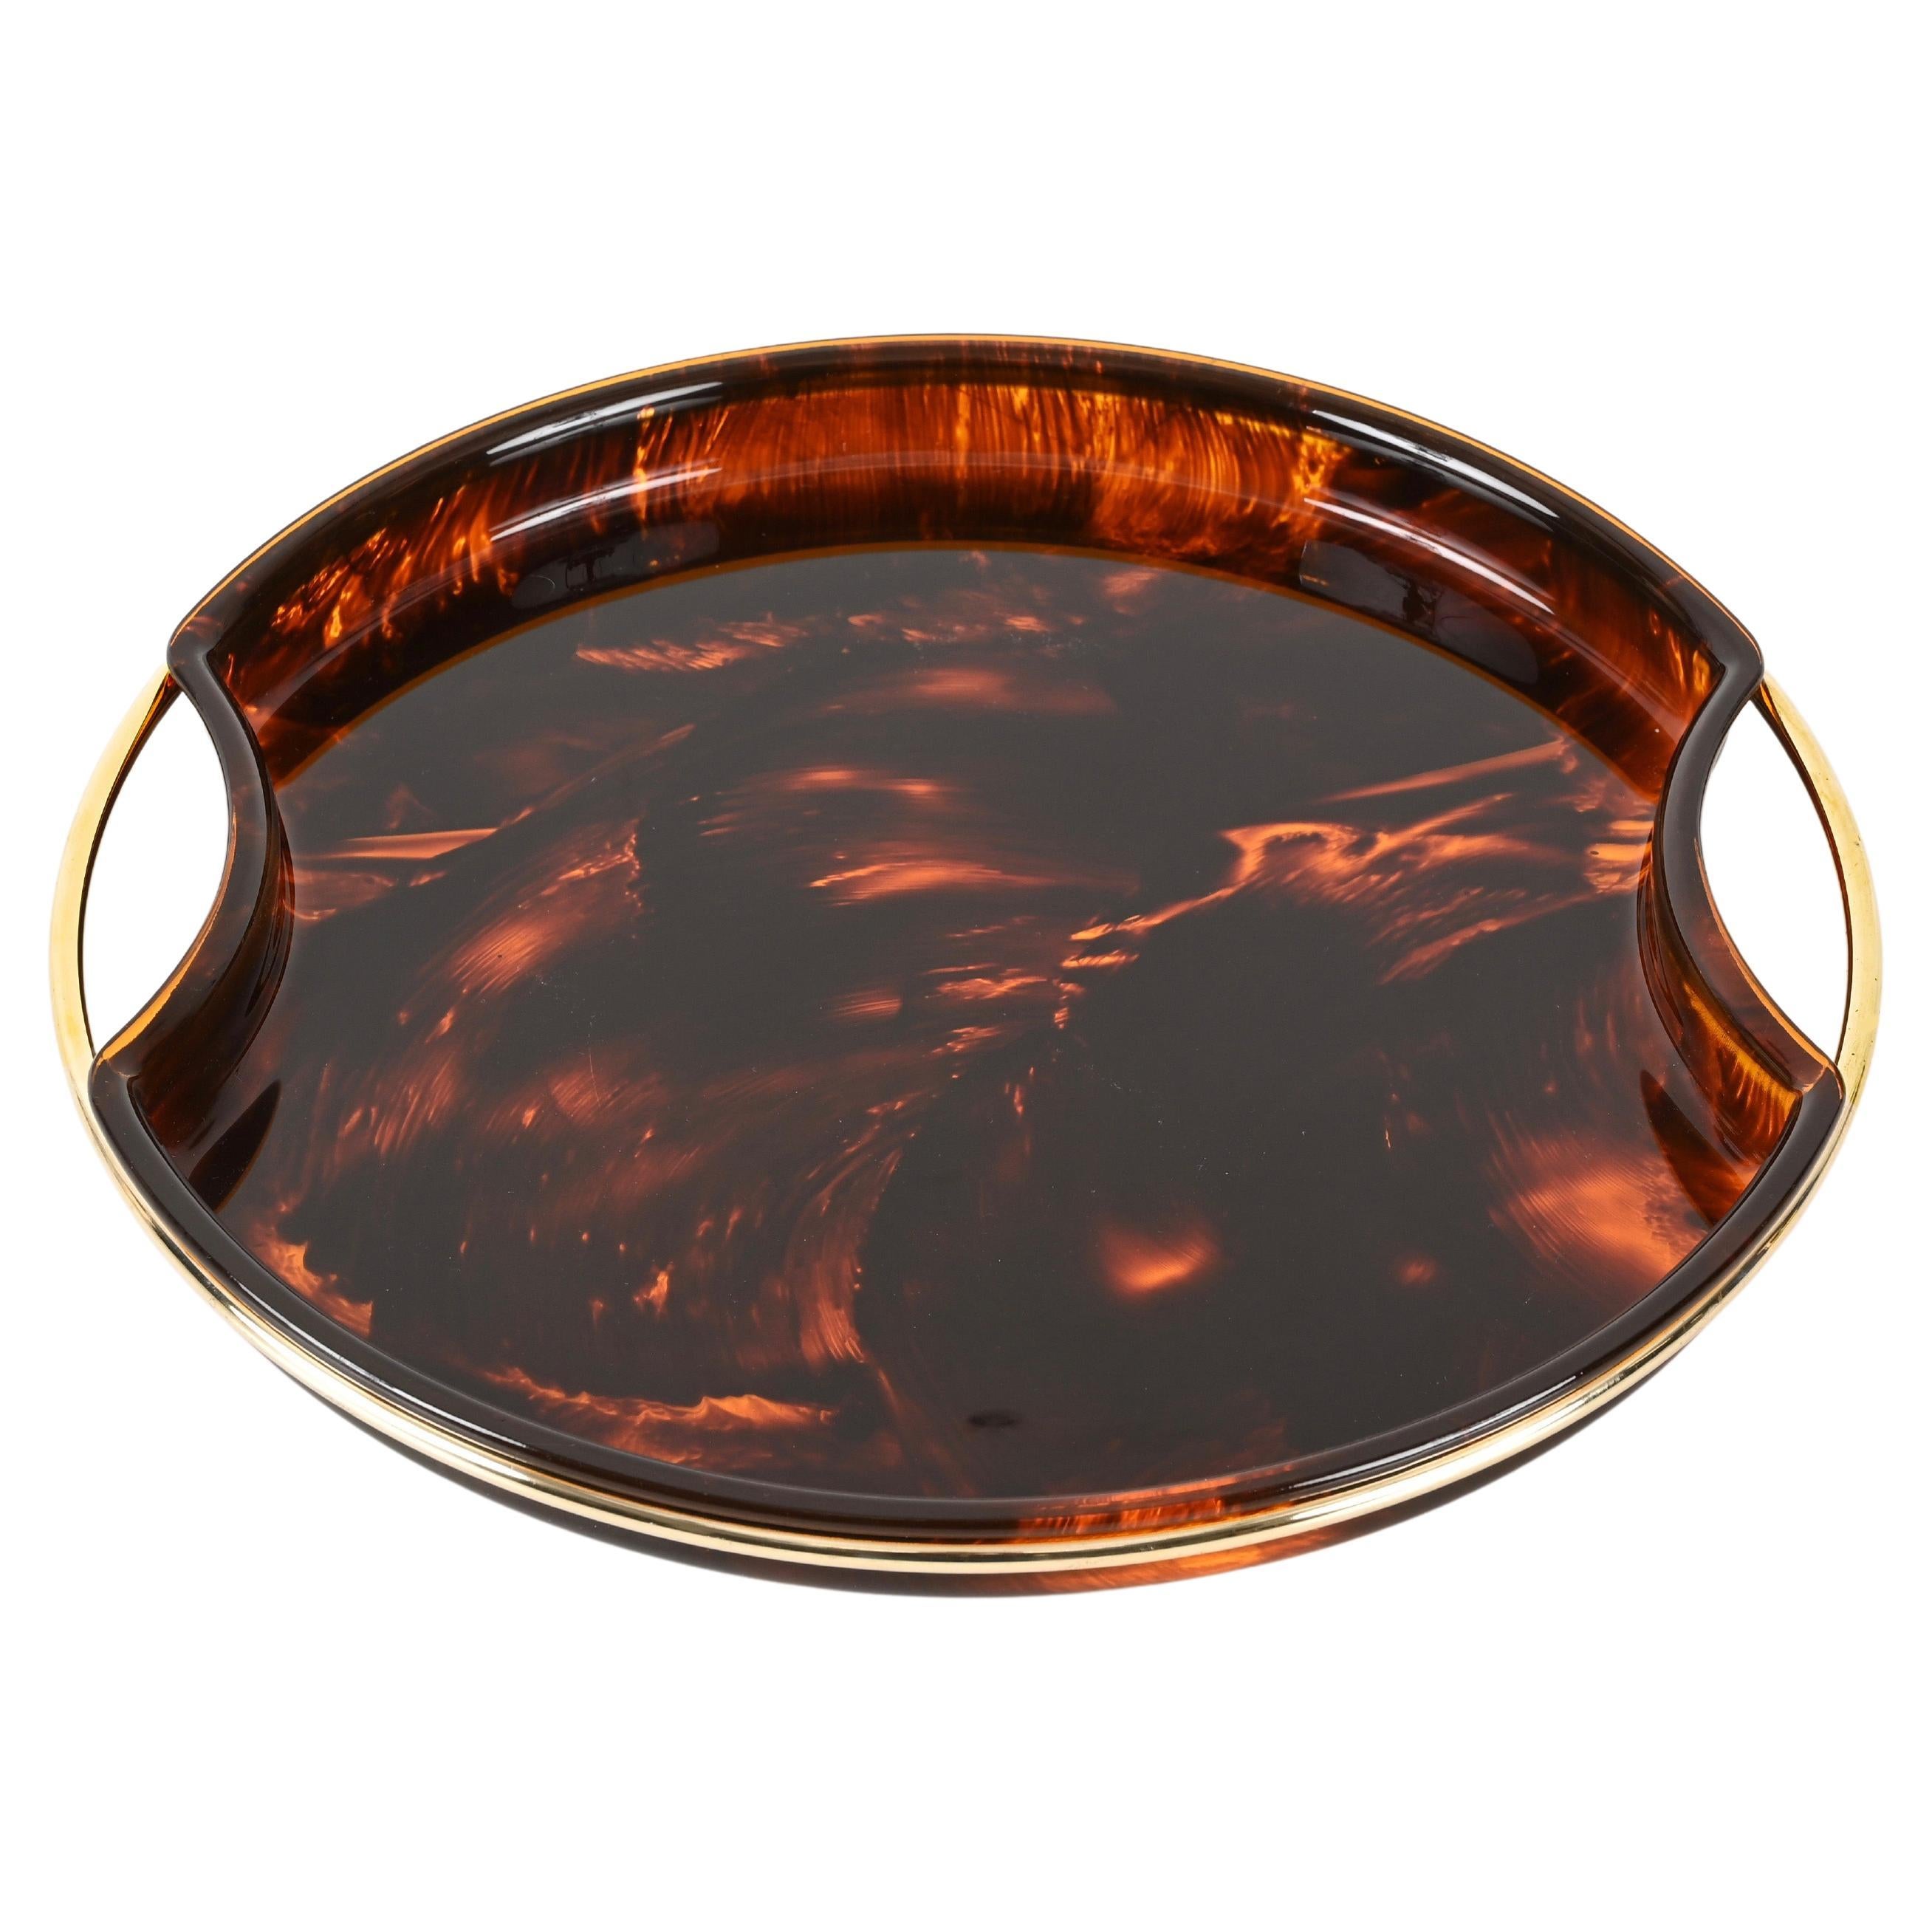 Mid-Century Tortoiseshell Lucite and Brass Serving Tray by Guzzini, Italy 1970s For Sale